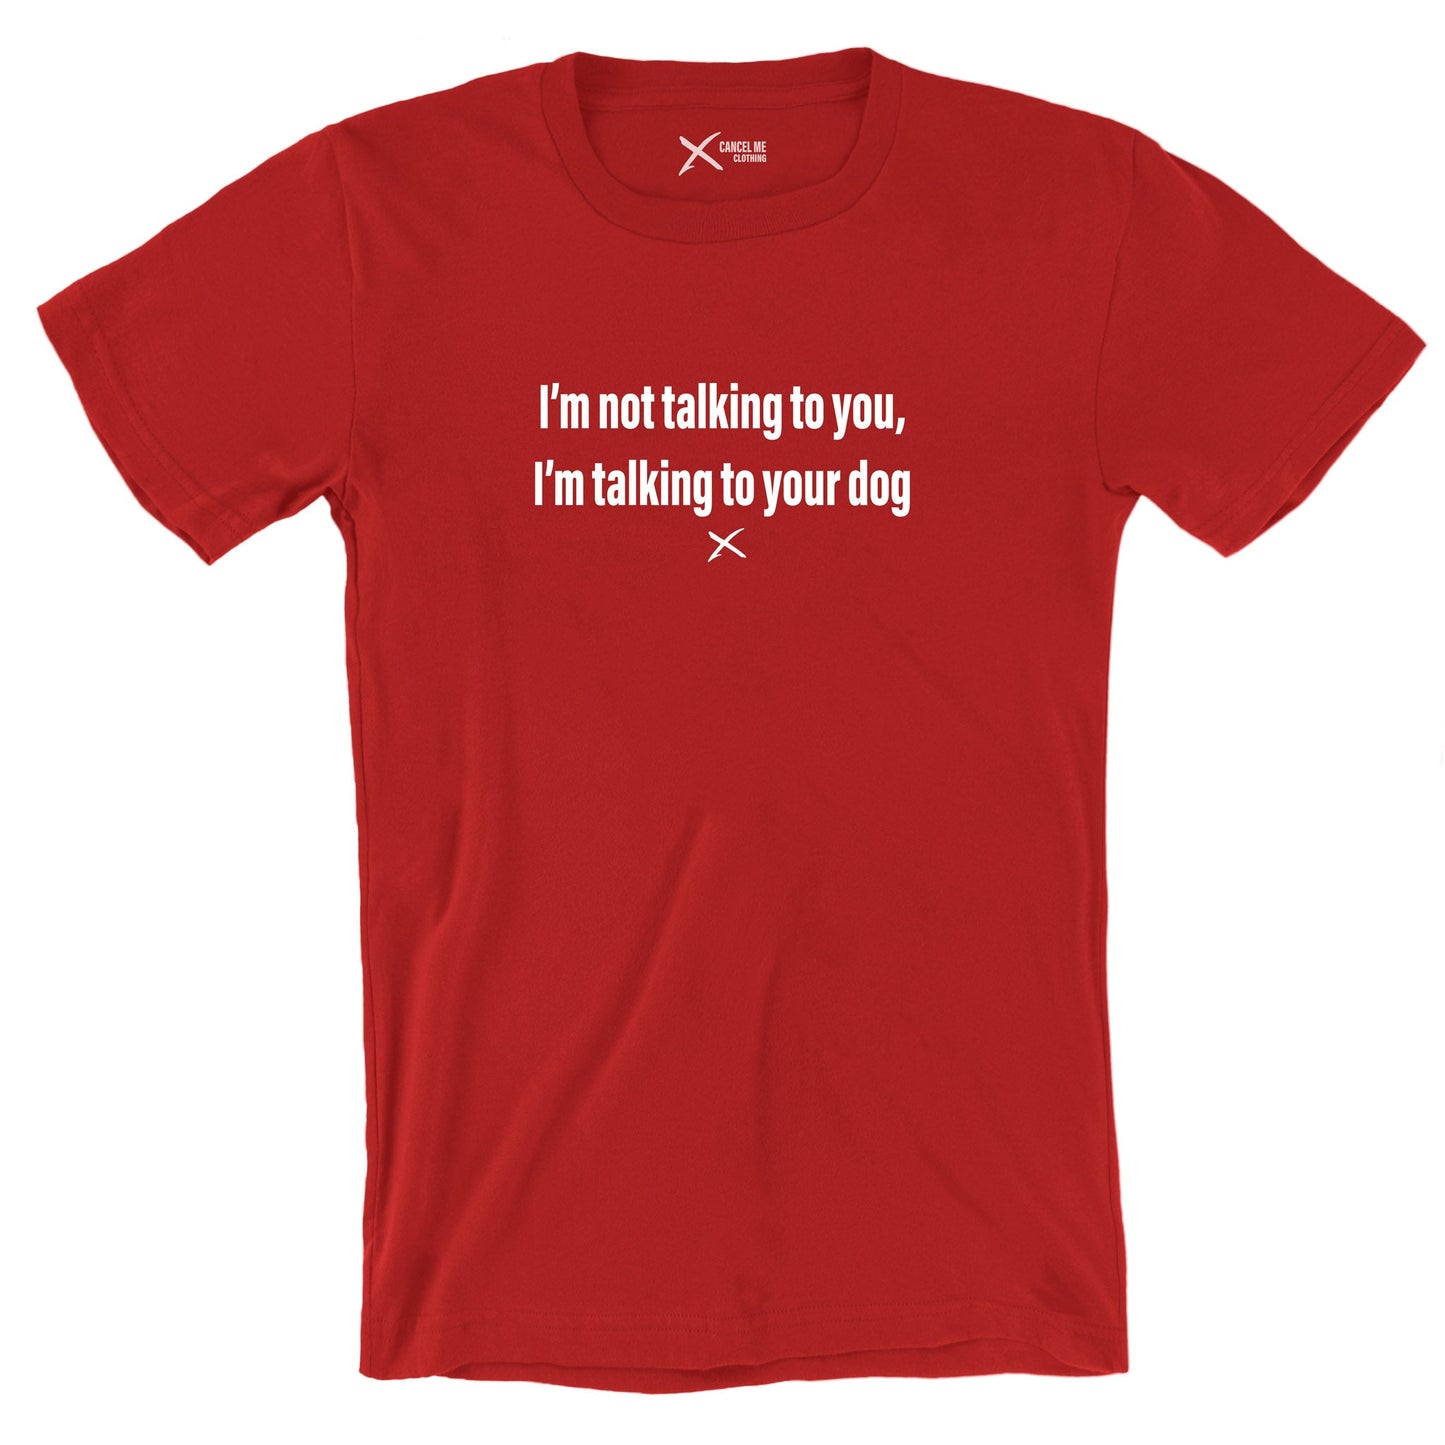 I'm not talking to you, I'm talking to your dog - Shirt